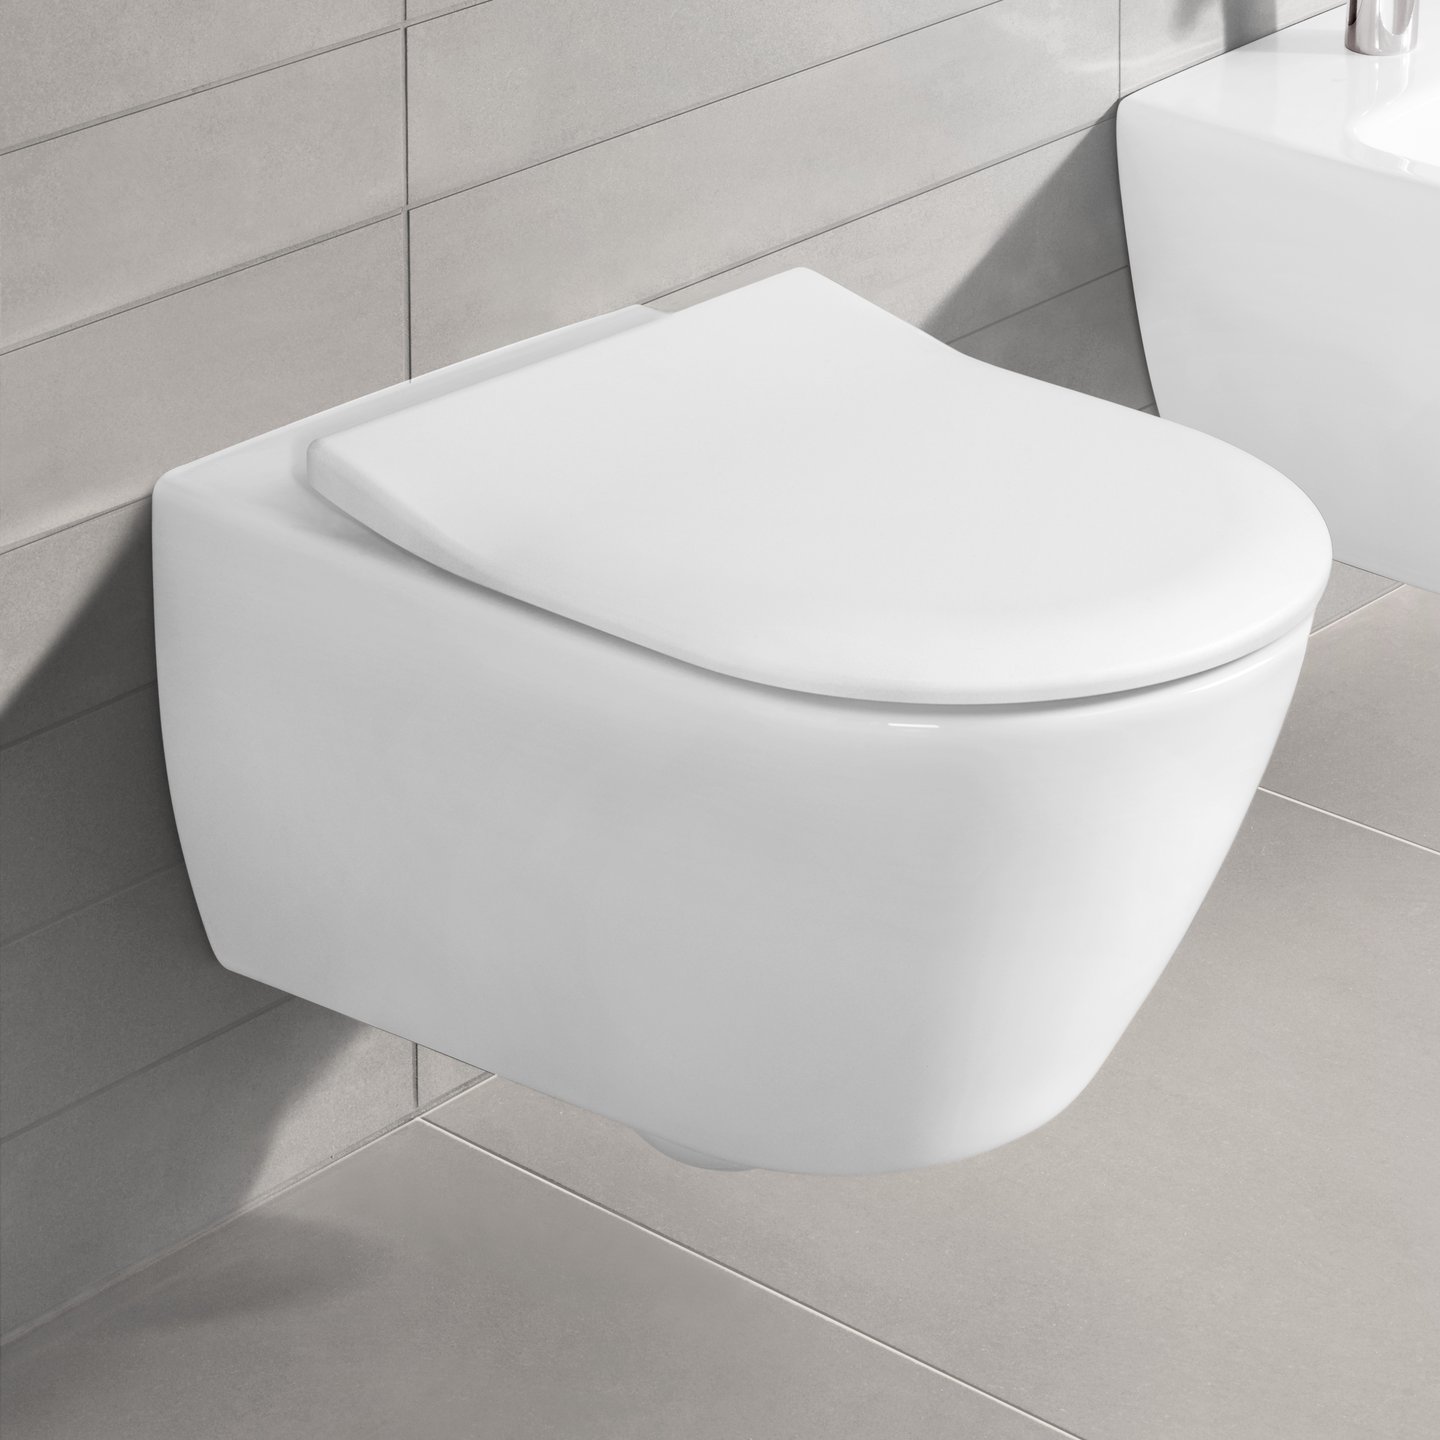 veer Luipaard Pessimist Villeroy & Boch Subway 2.0 combi pack wall-mounted washdown toilet, open  flush rim, with toilet seat white, with CeramicPlus - 5614R2R1 | REUTER